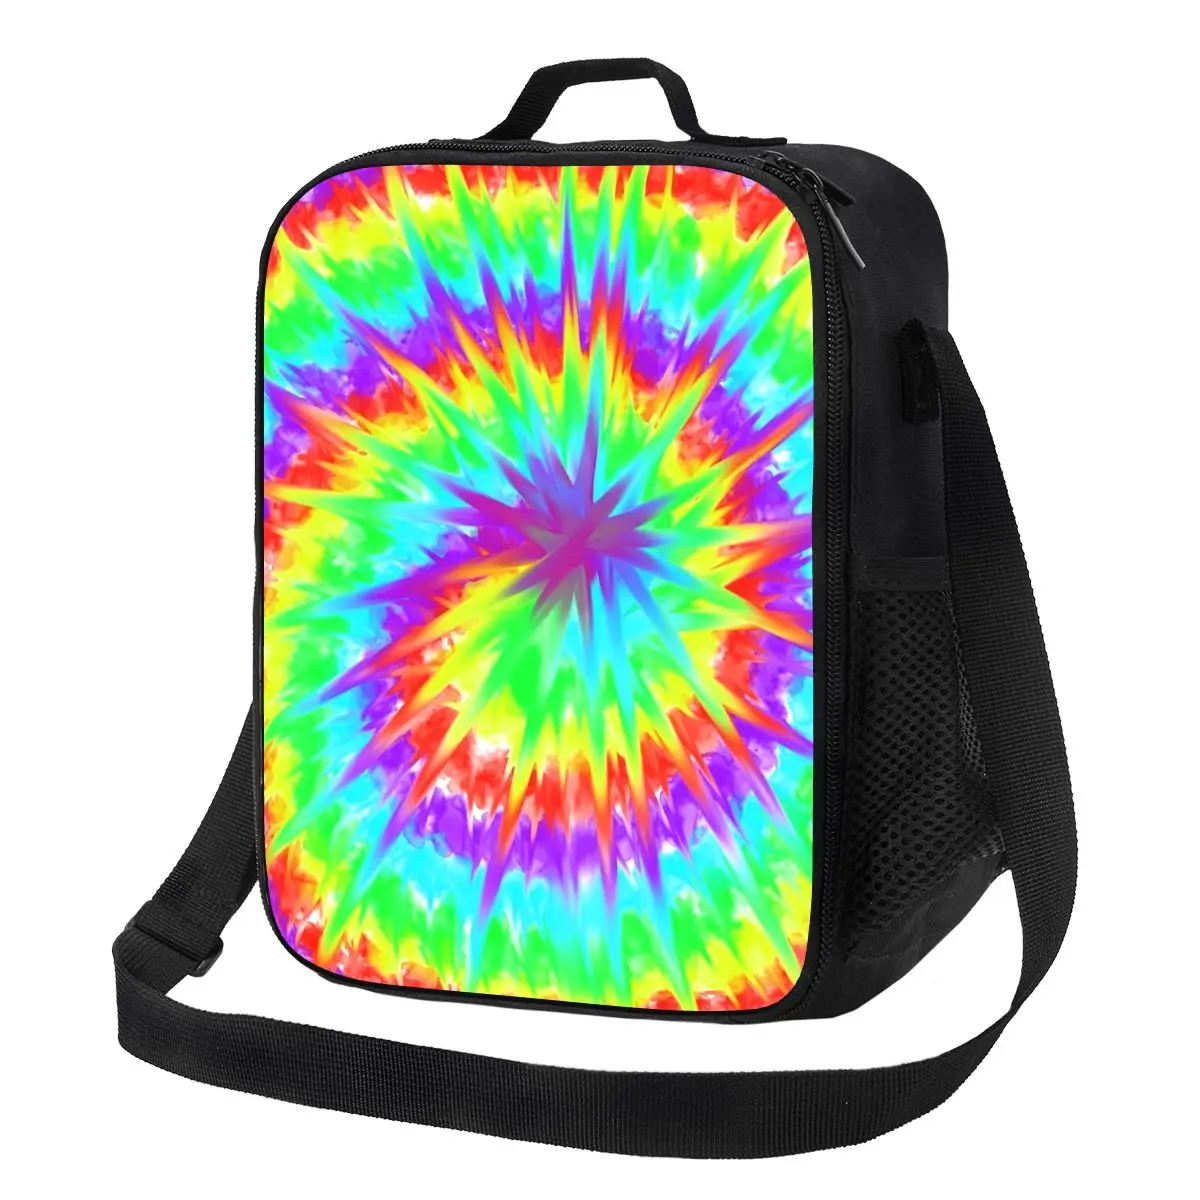 

Bright Tie Dye Lunch Bag Swirl Portable Insulated Lunch Box Outdoor Picnic Print Cooler Bag Fashion Oxford Tote Food Bags